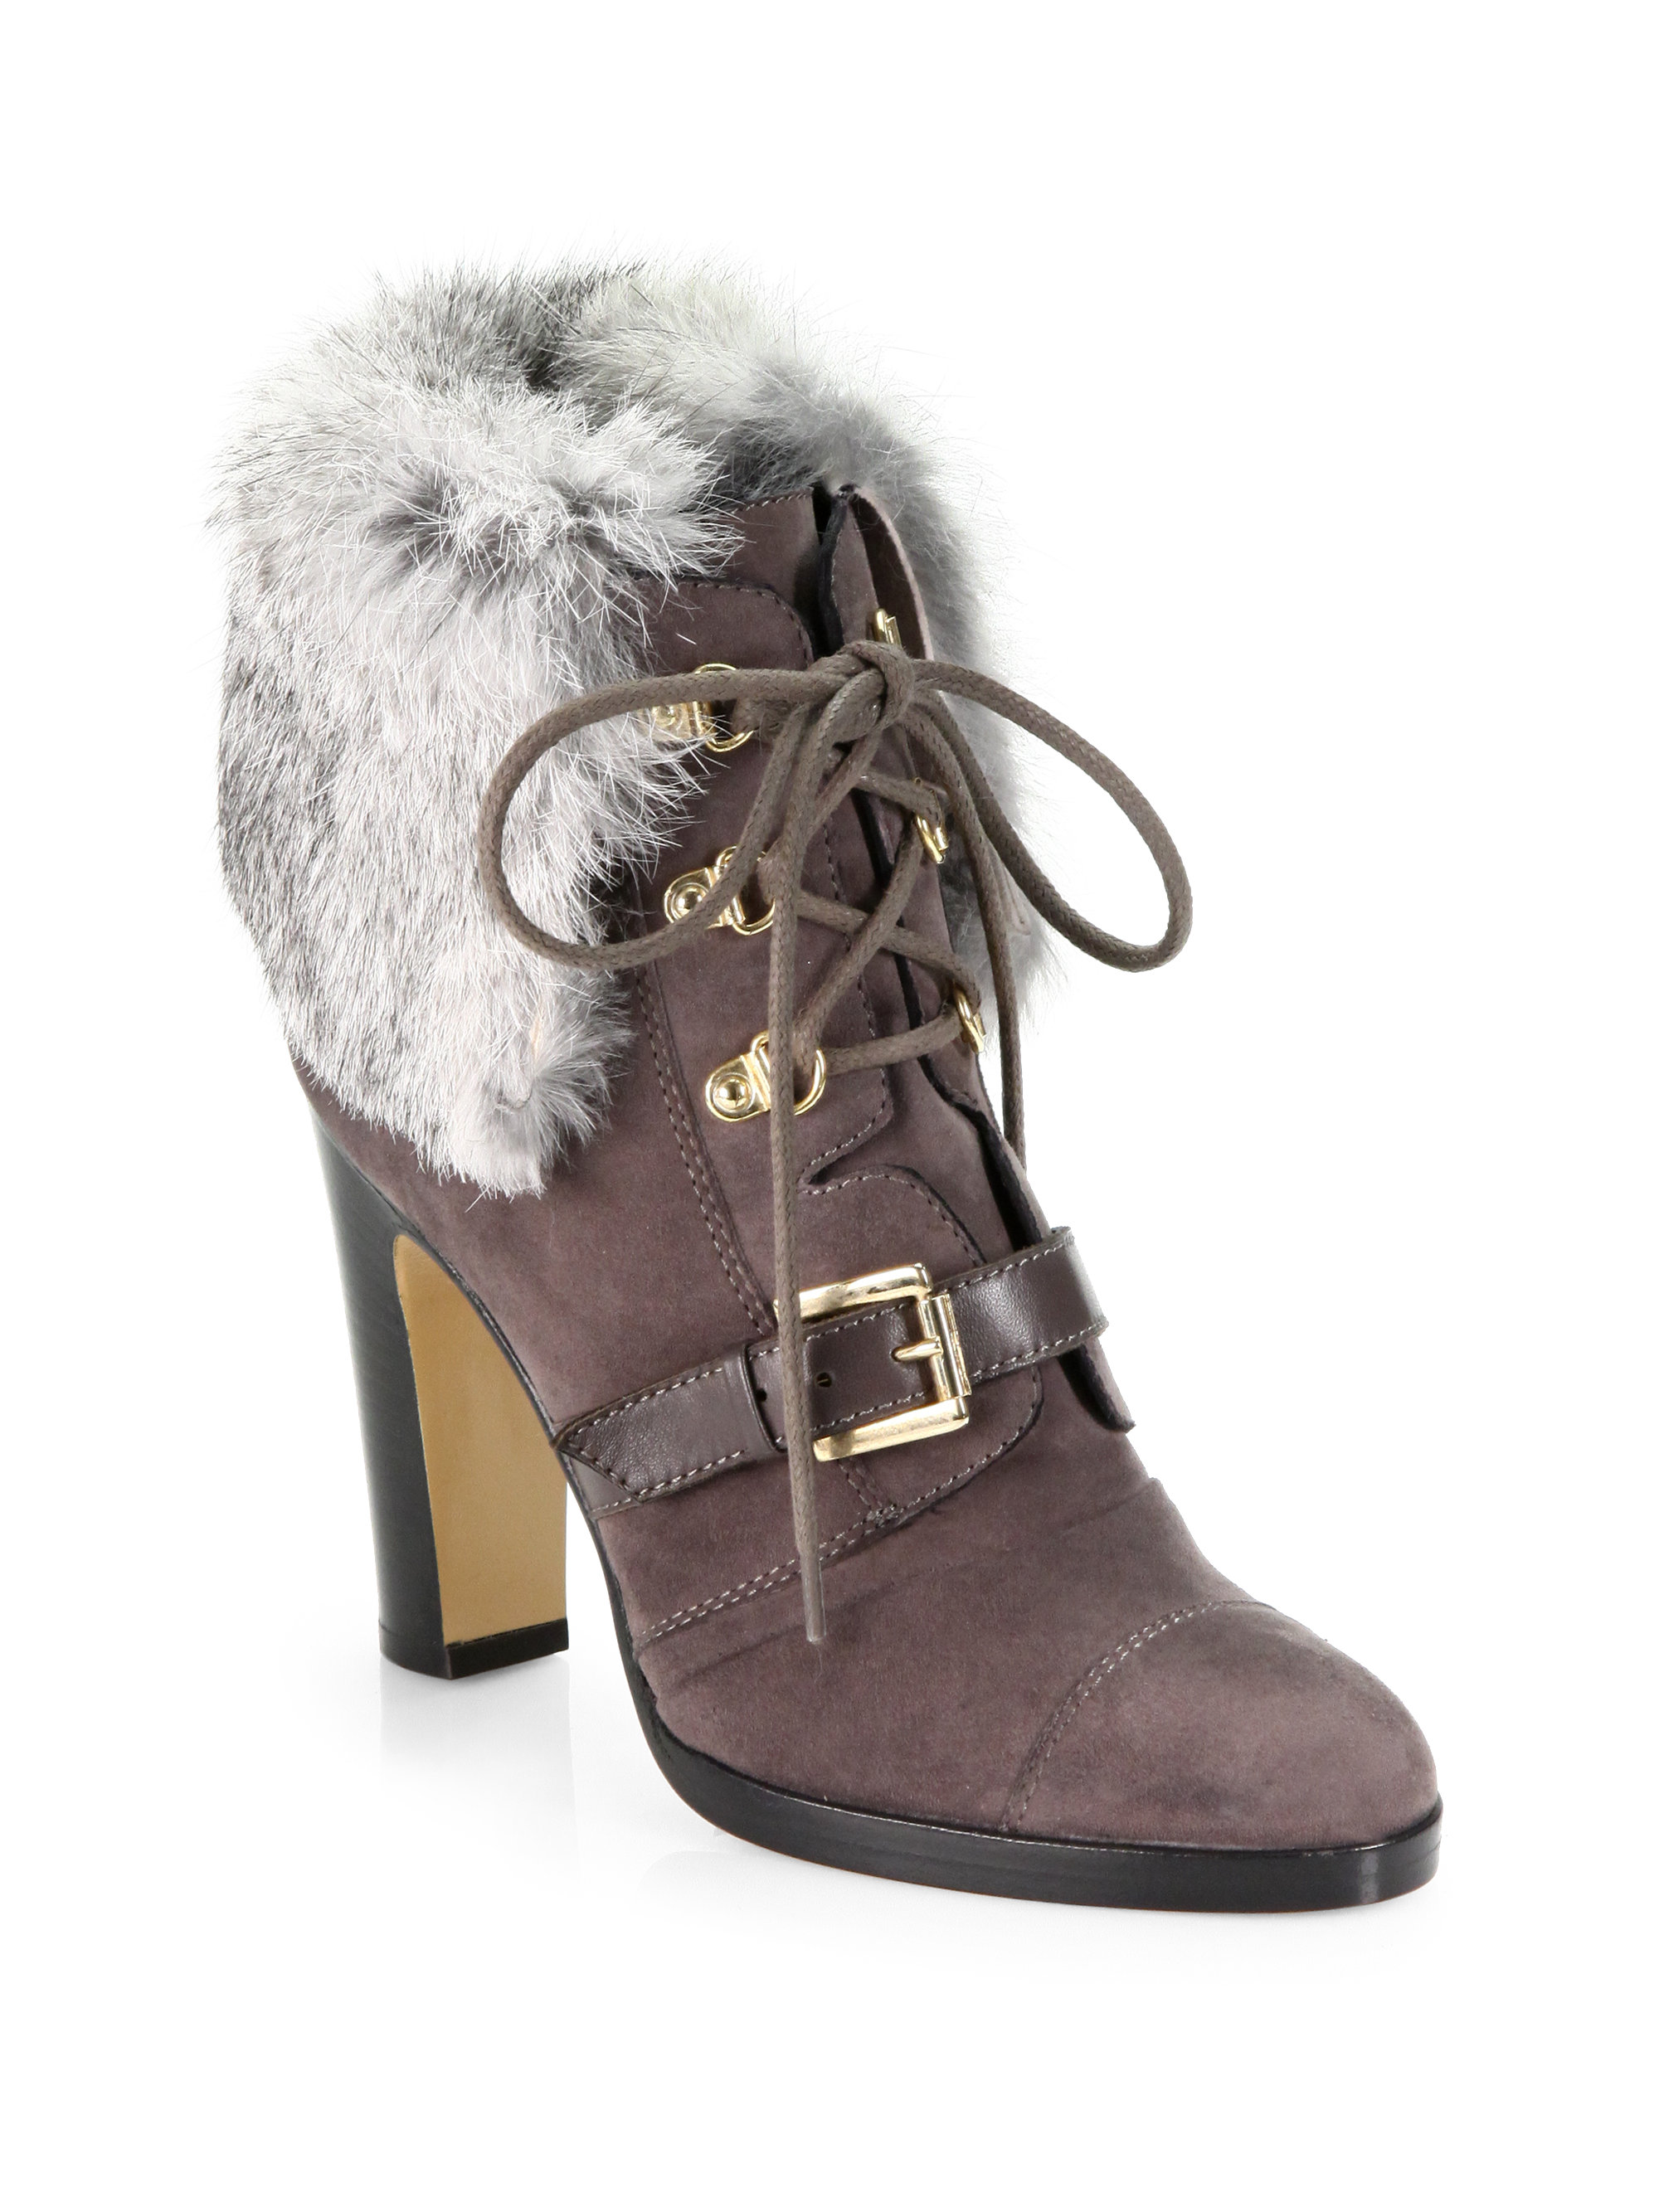 Aquatalia By Marvin K Grandly Furtrimmed Suede Ankle Boots in Brown ...